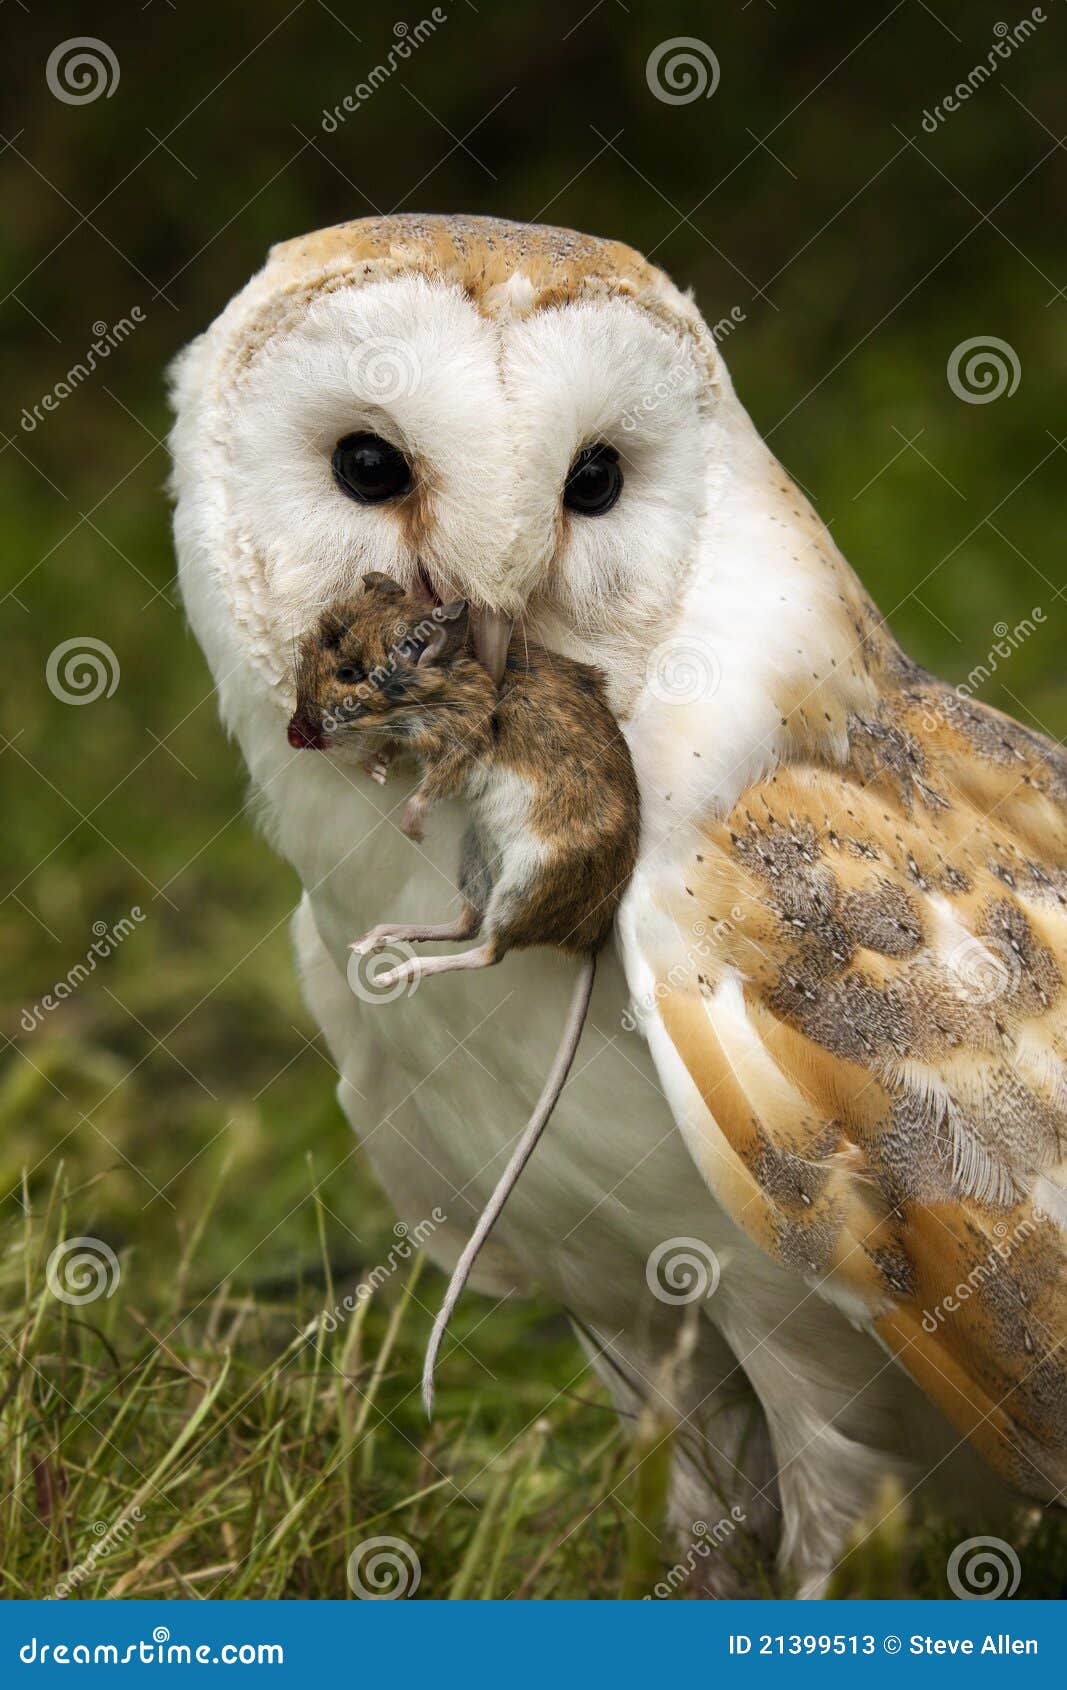 barn owl captures a field mouse